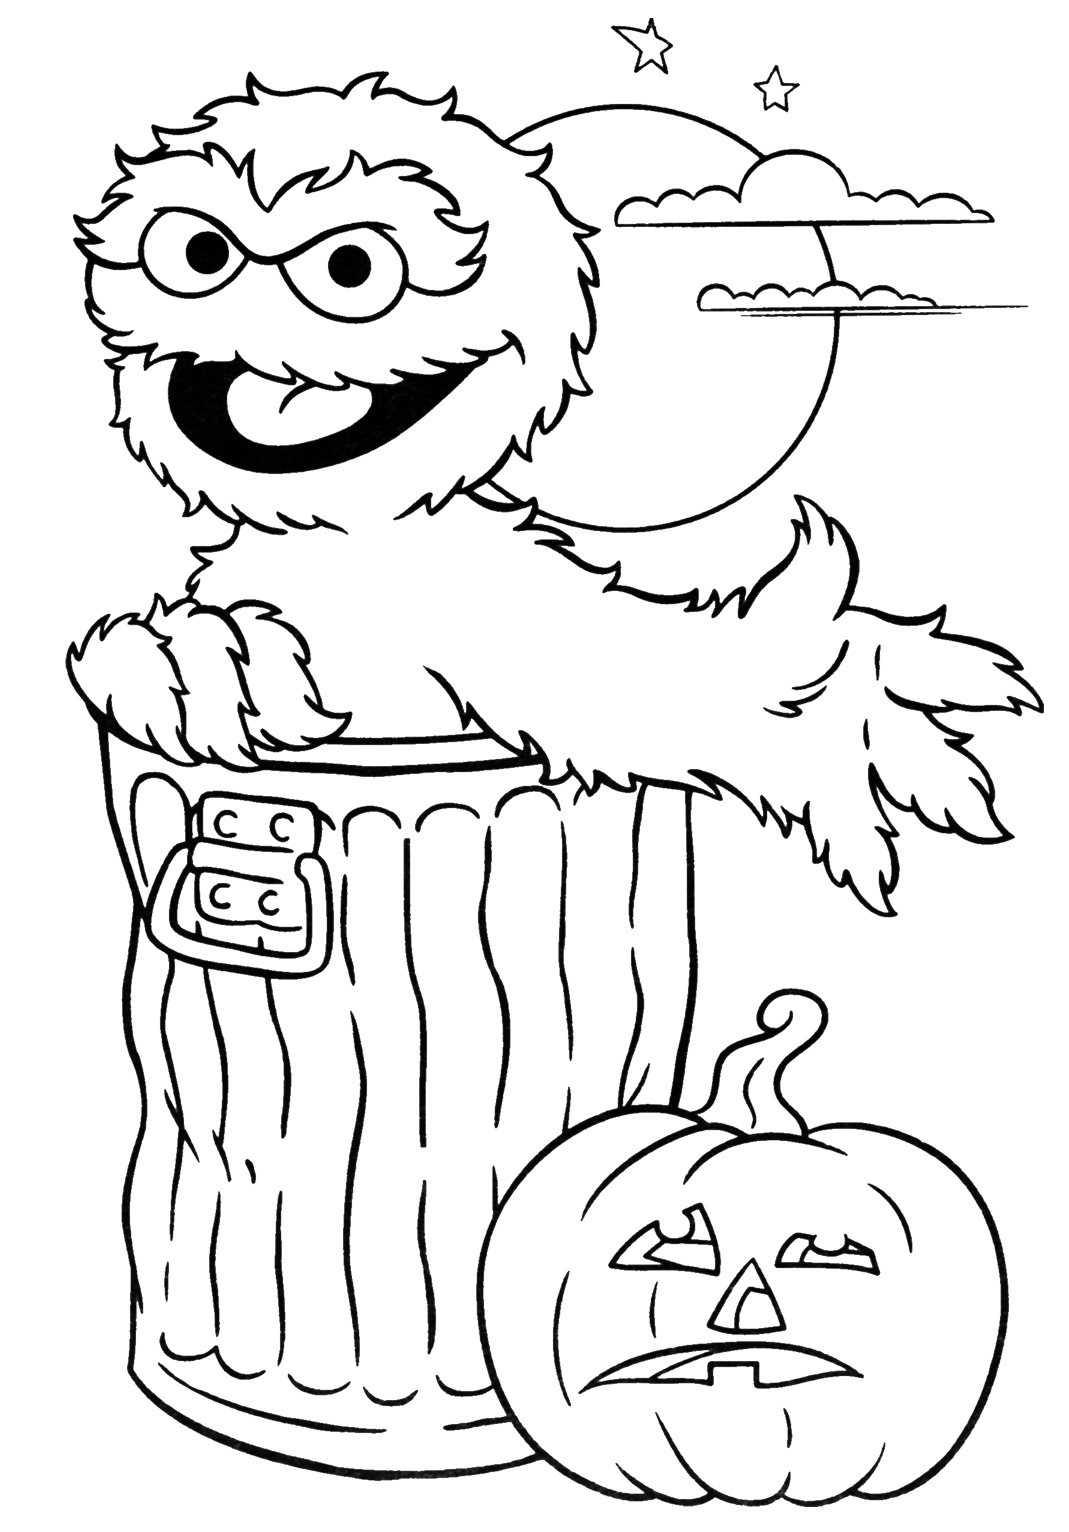 Halloween Coloring Pictures For Kids
 24 Free Halloween Coloring Pages for Kids Honey Lime